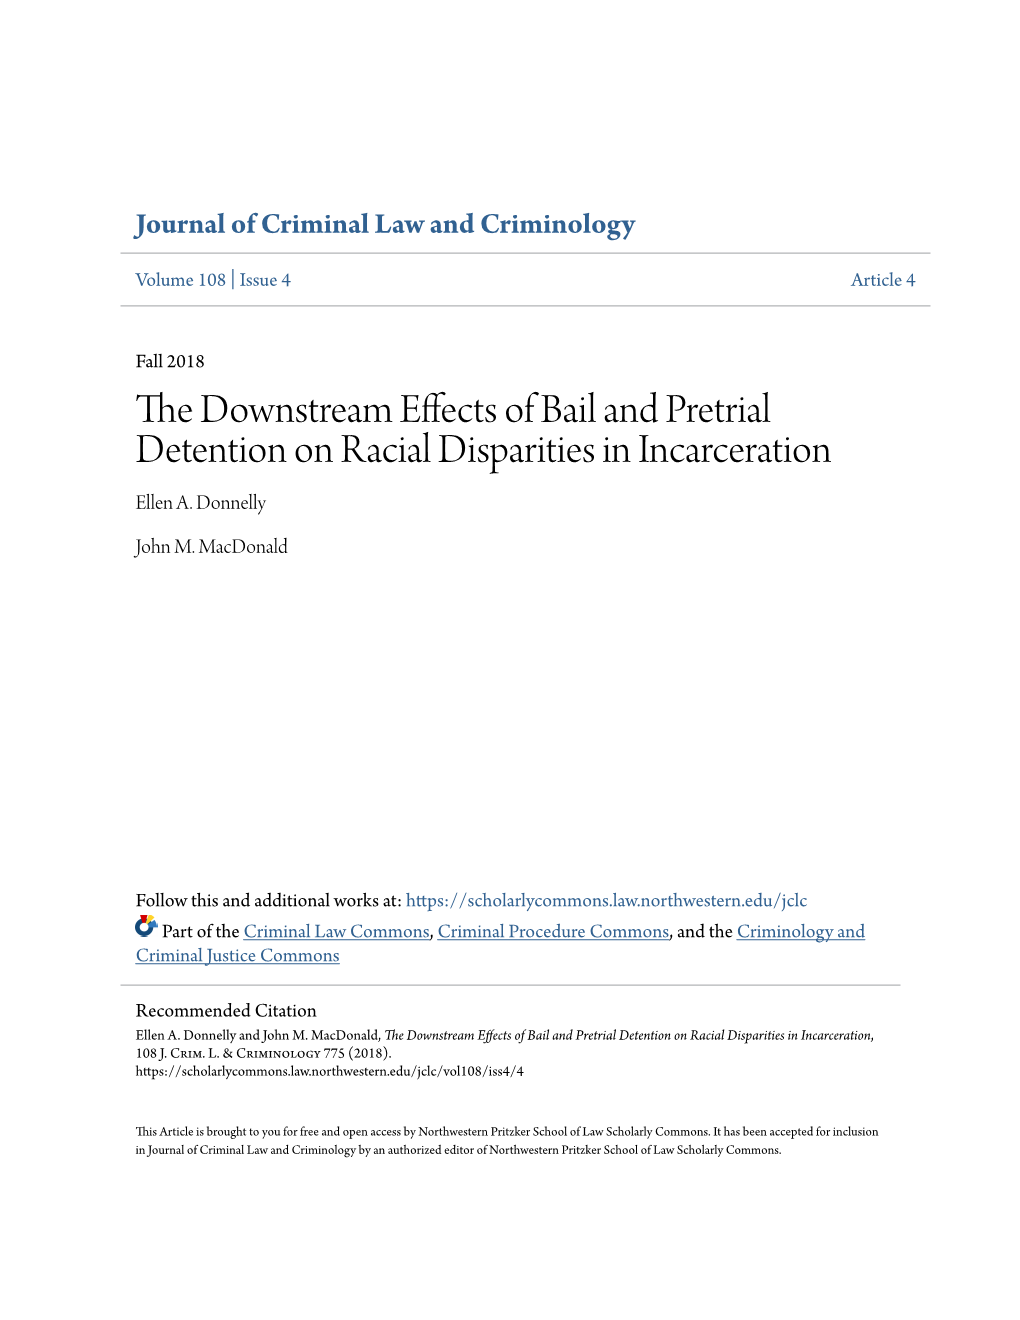 The Downstream Effects of Bail and Pretrial Detention on Racial Disparities in Incarceration, 108 J